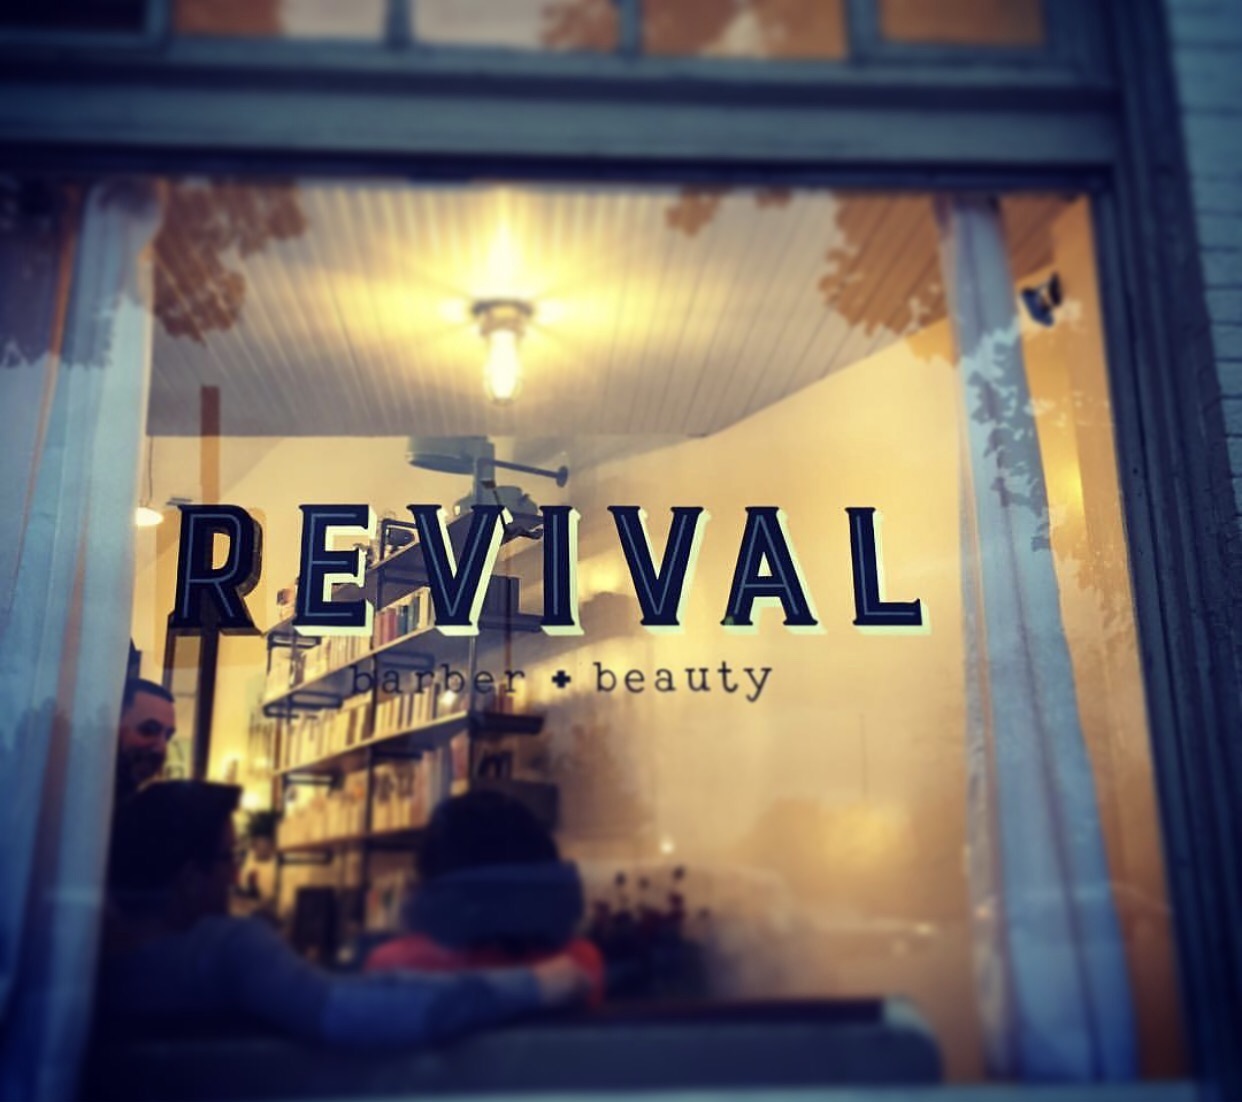 Revival barber and beauty